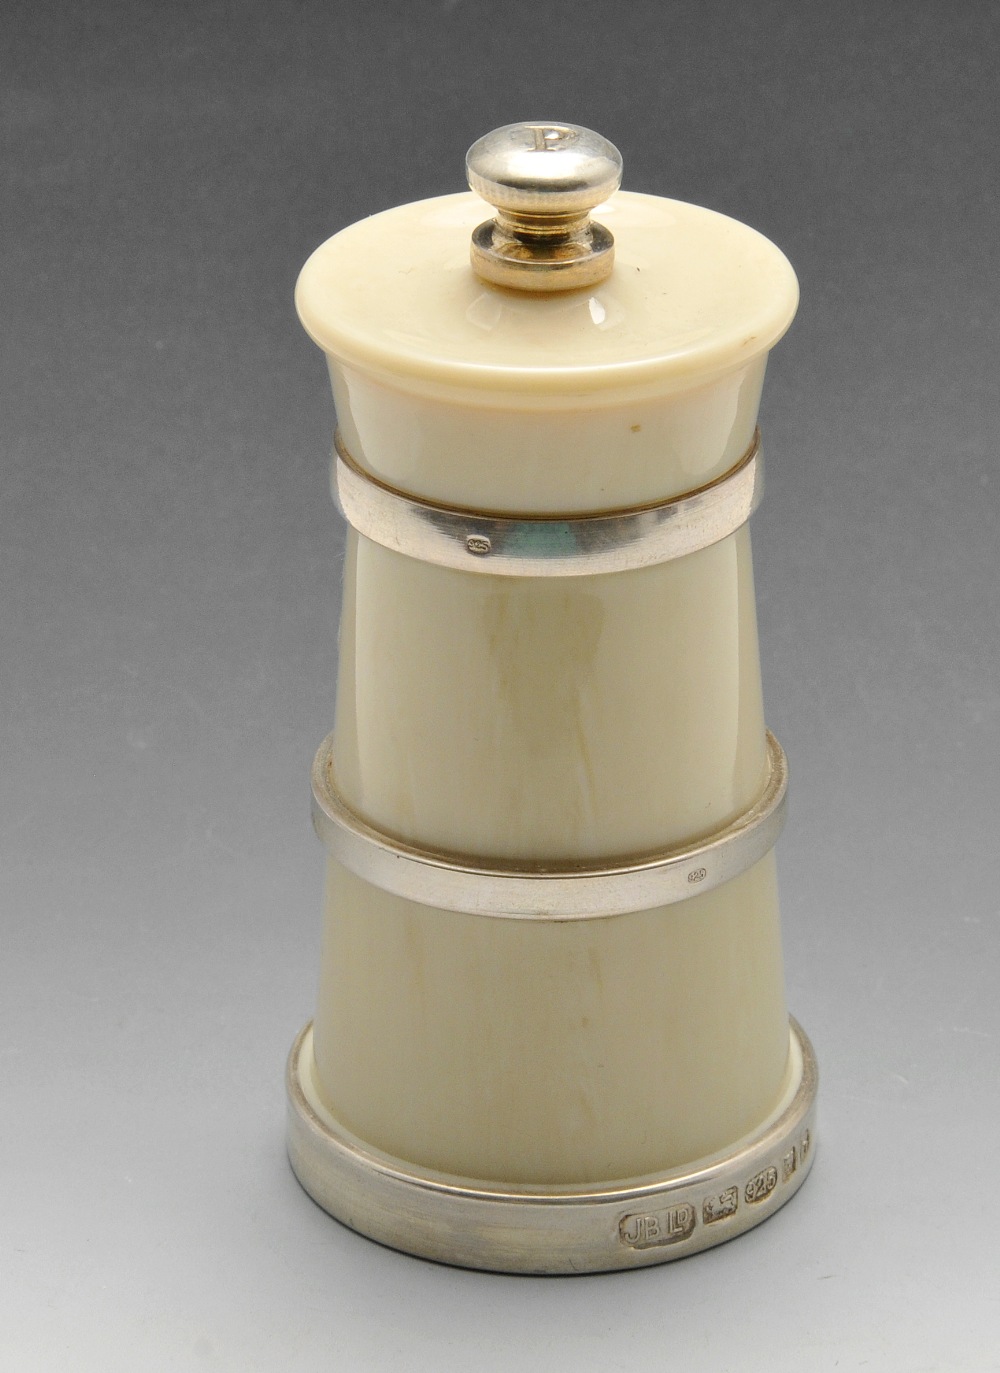 A modern silver mounted ivorine pepper grinder of tiered and banded form. Hallmarked London 2007.